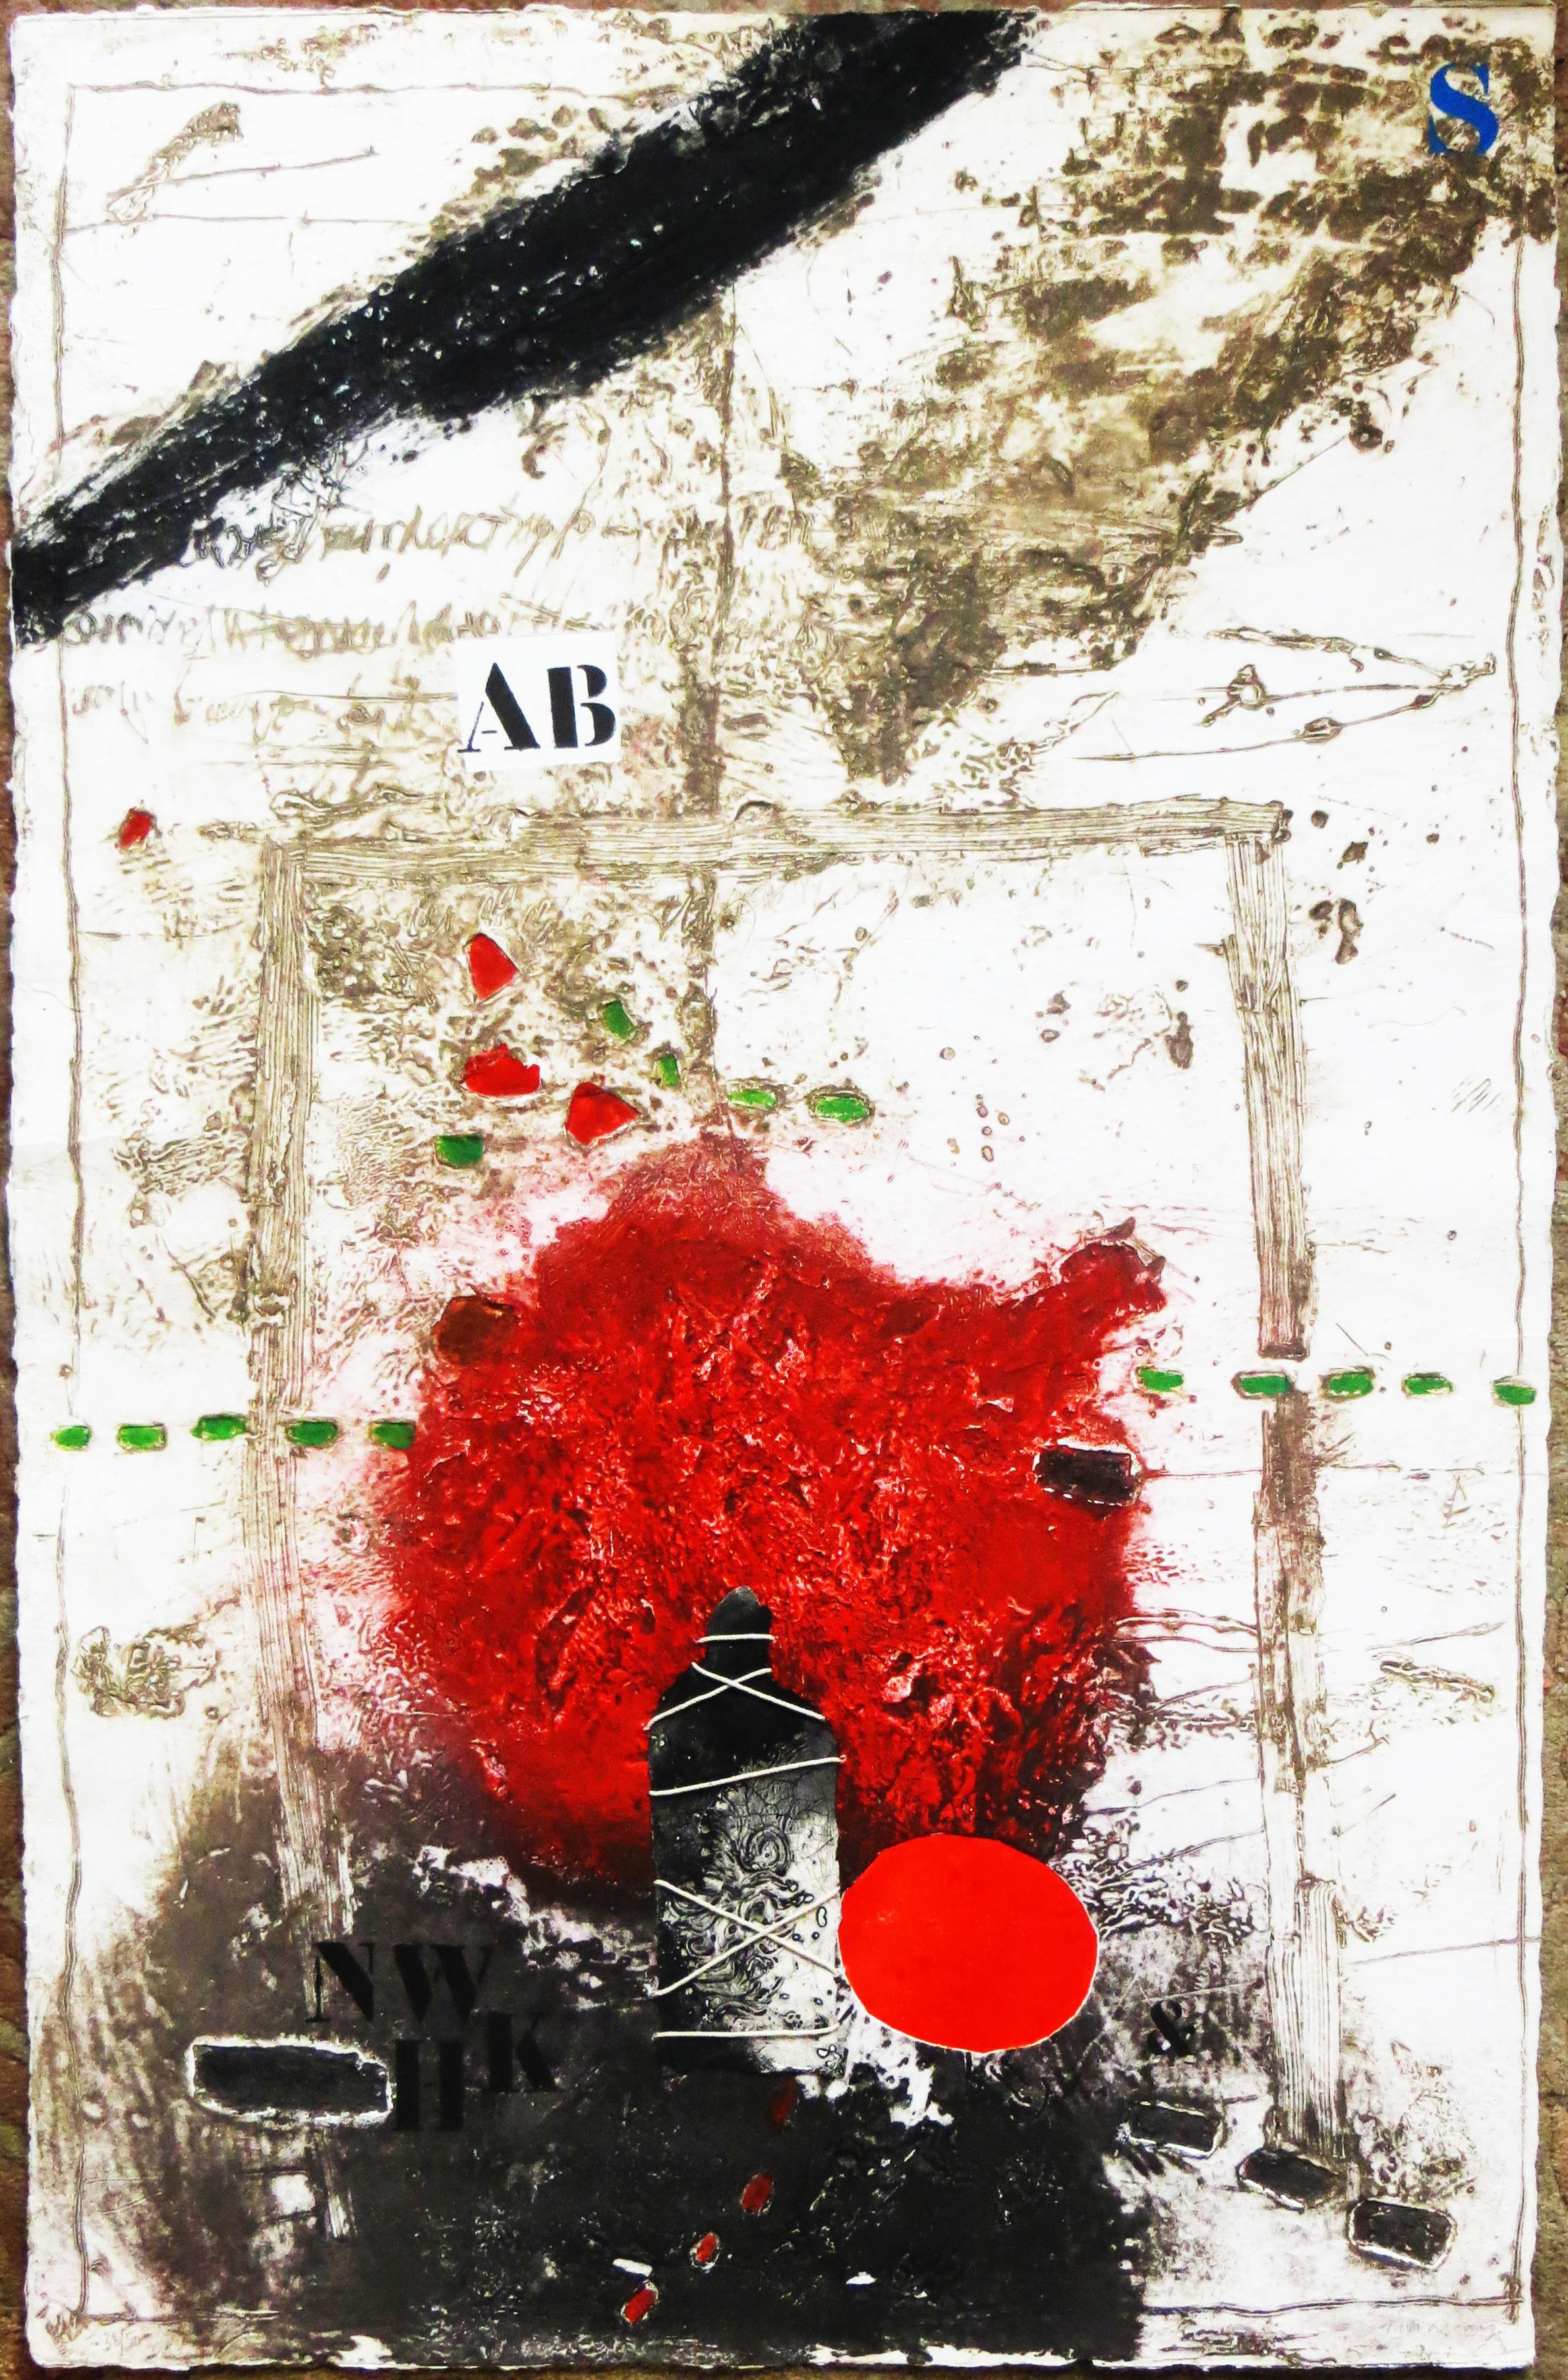 James Coignard Abstract Print - Unknown - from Otage et Rouge series